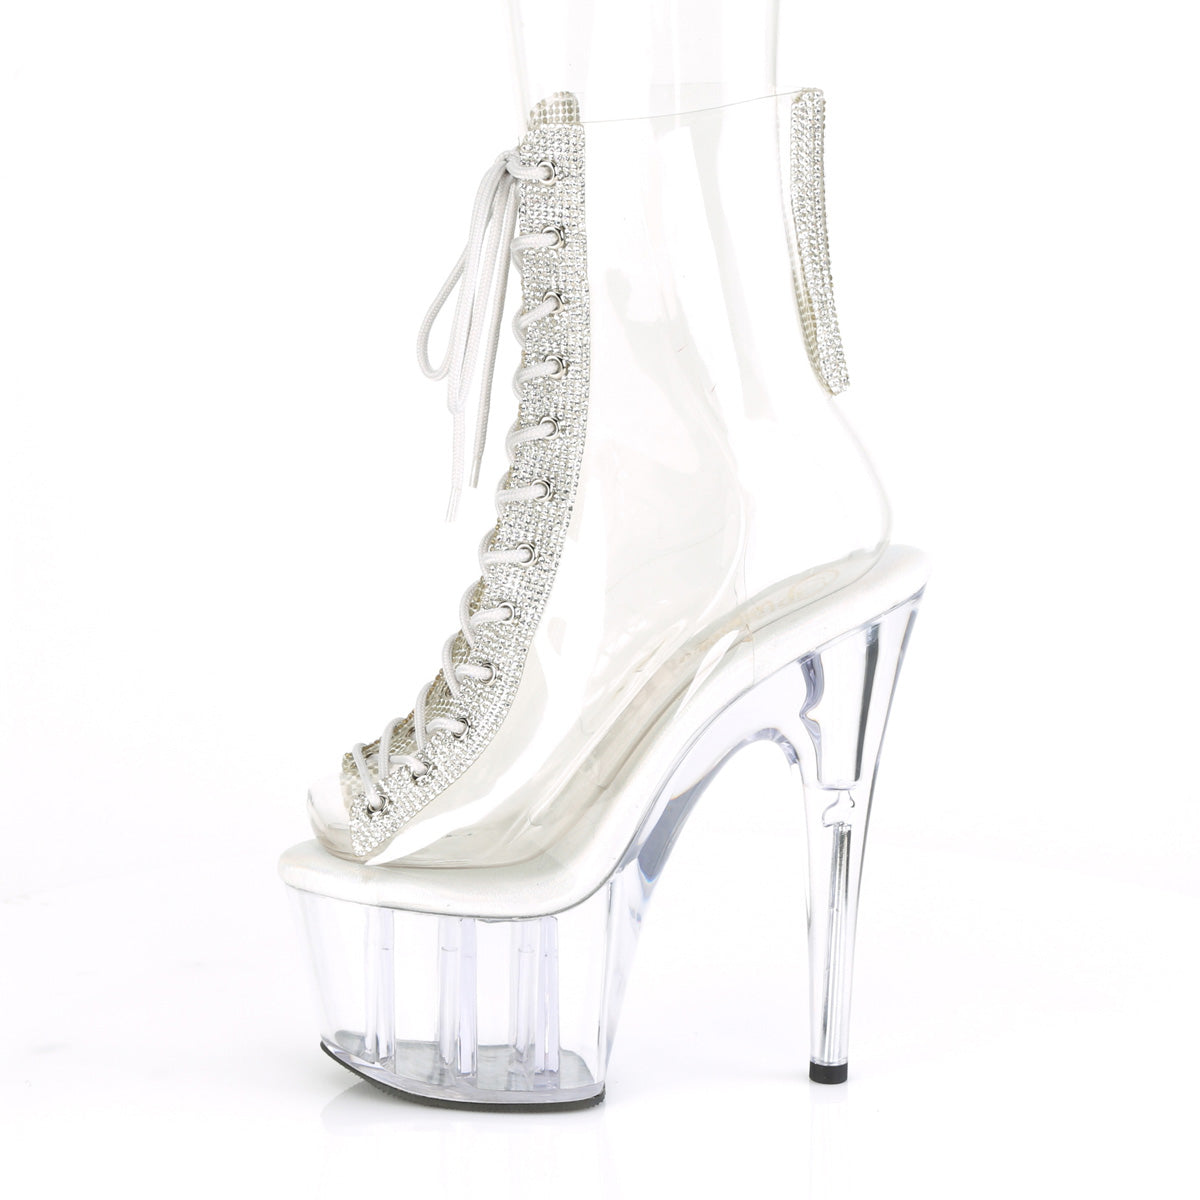 ADORE-1016C-2 Pleaser Pole Dancing Shoes Ankle Boots Pleasers - Sexy Shoes Pole Dance Heels